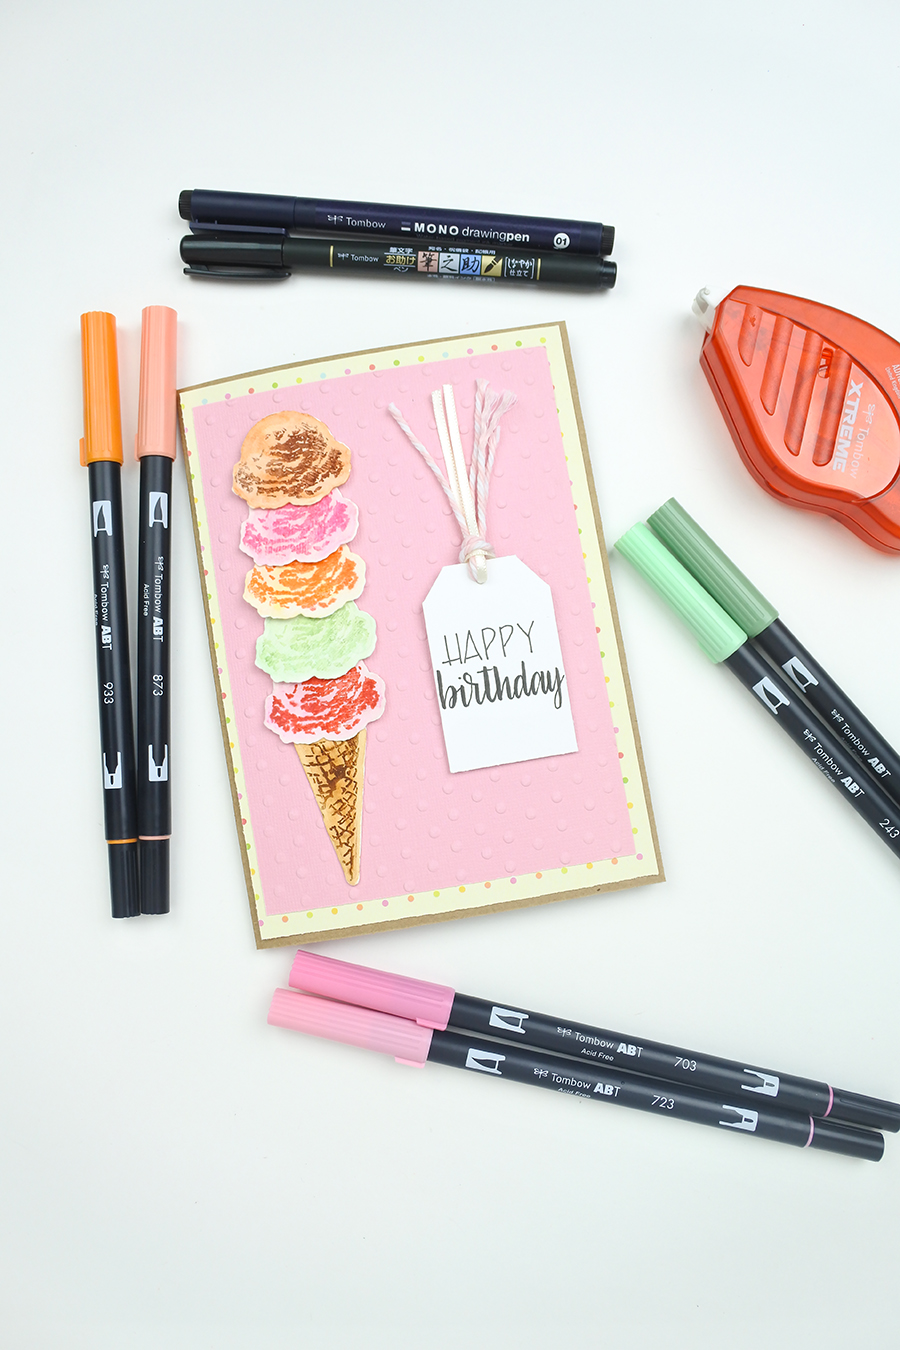 How to Watercolor with Tombow Brush Pens and Rubber Stamps